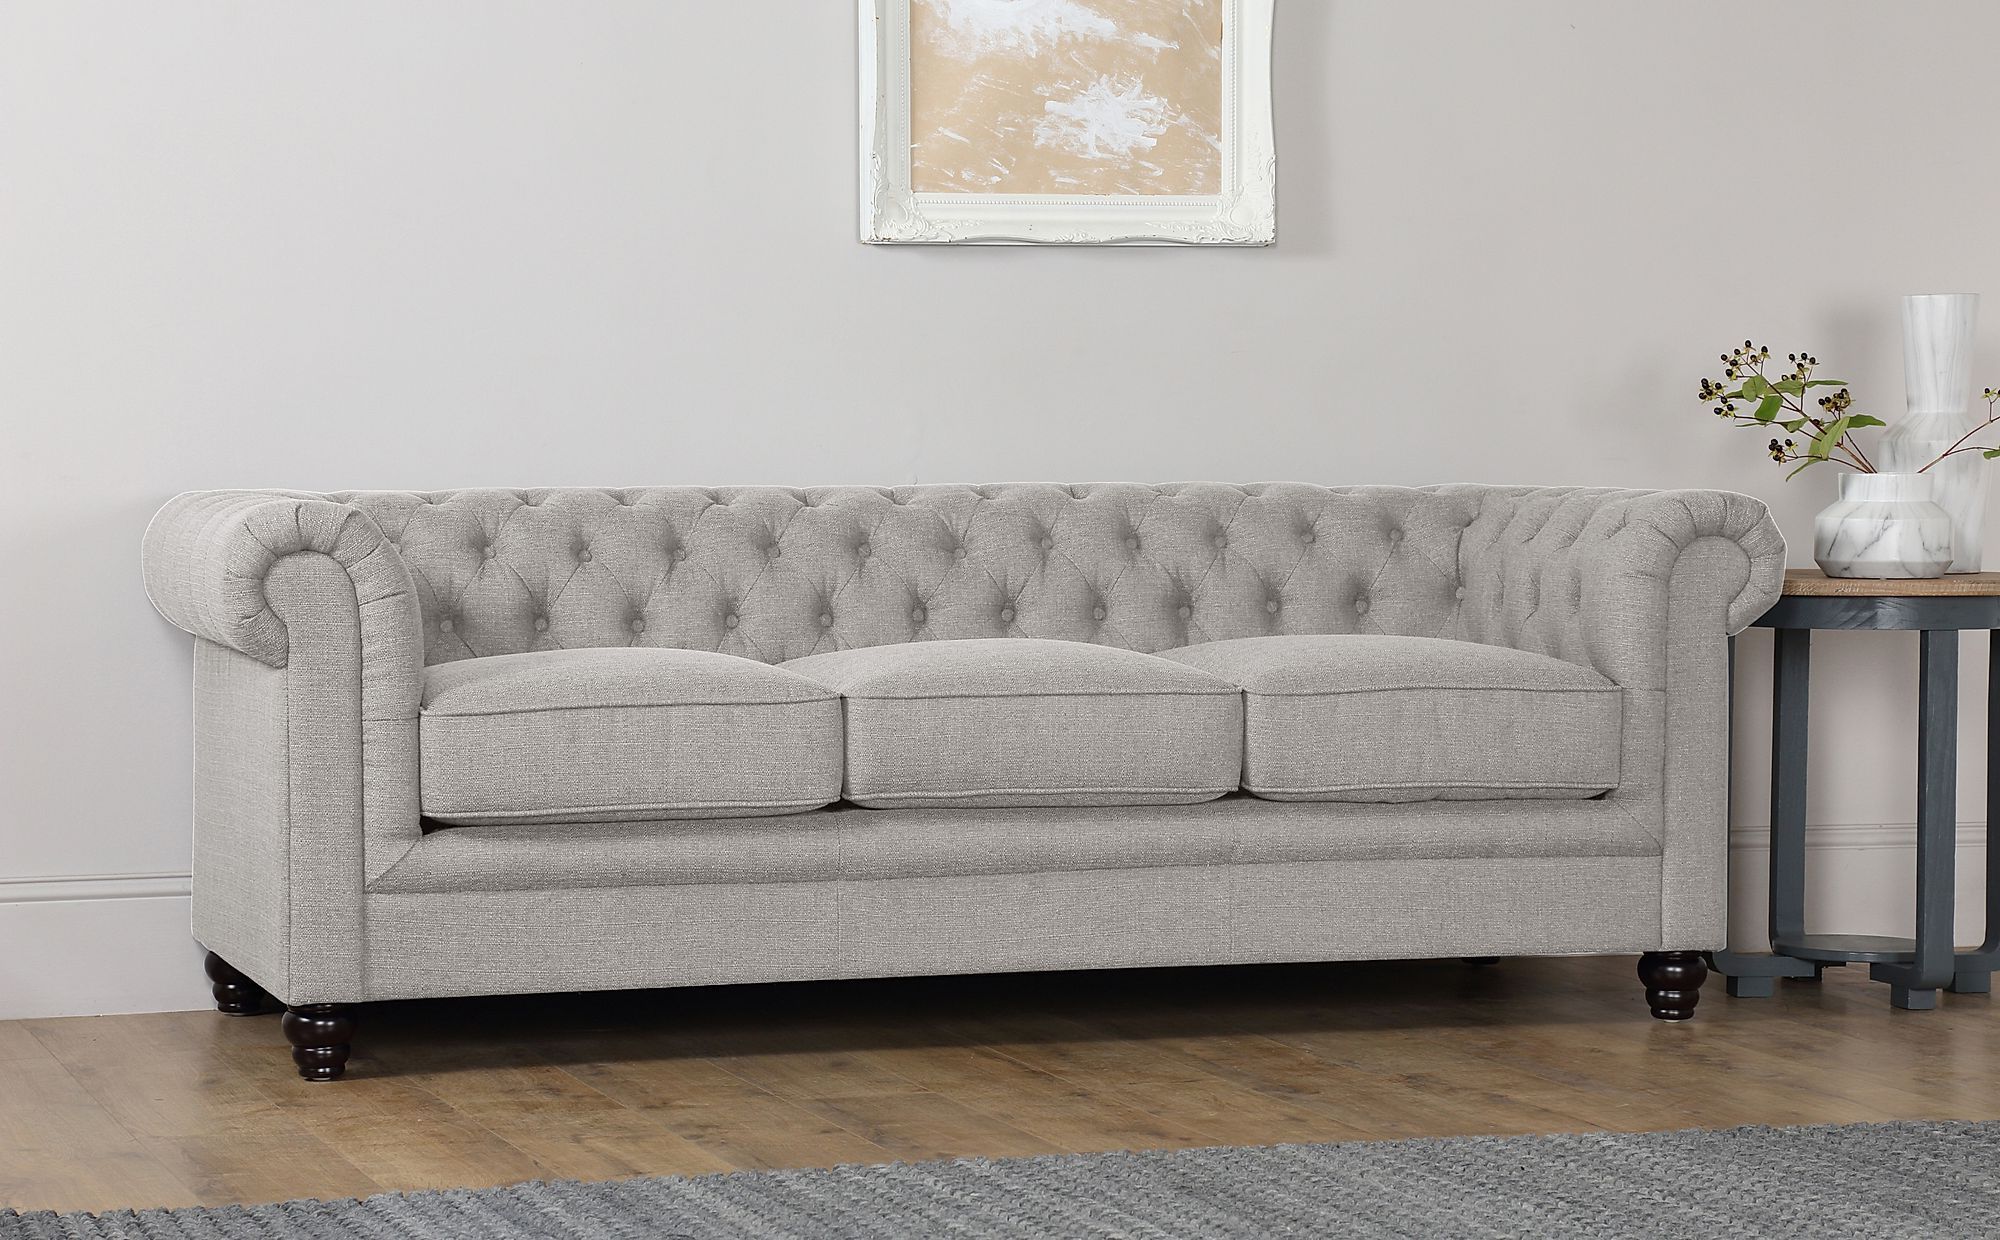 Hampton Light Grey Fabric 3 Seater Chesterfield Sofa | Furniture Choice In Sofas In Light Gray (View 14 of 20)